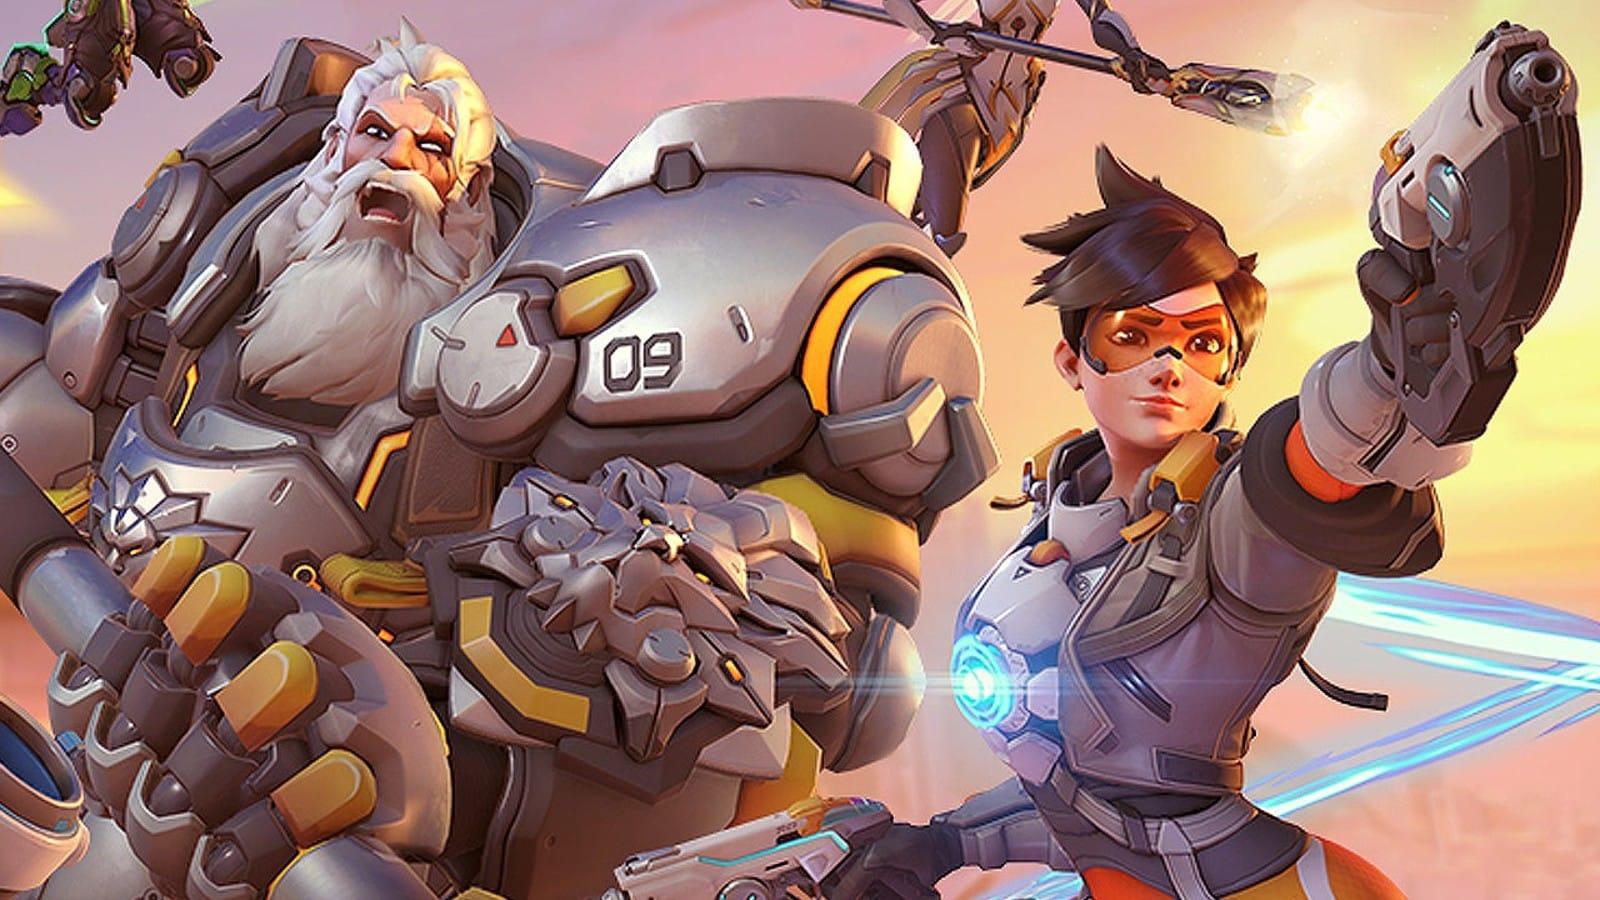 An image of the Overwatch characters Torbjorn and Tracer.